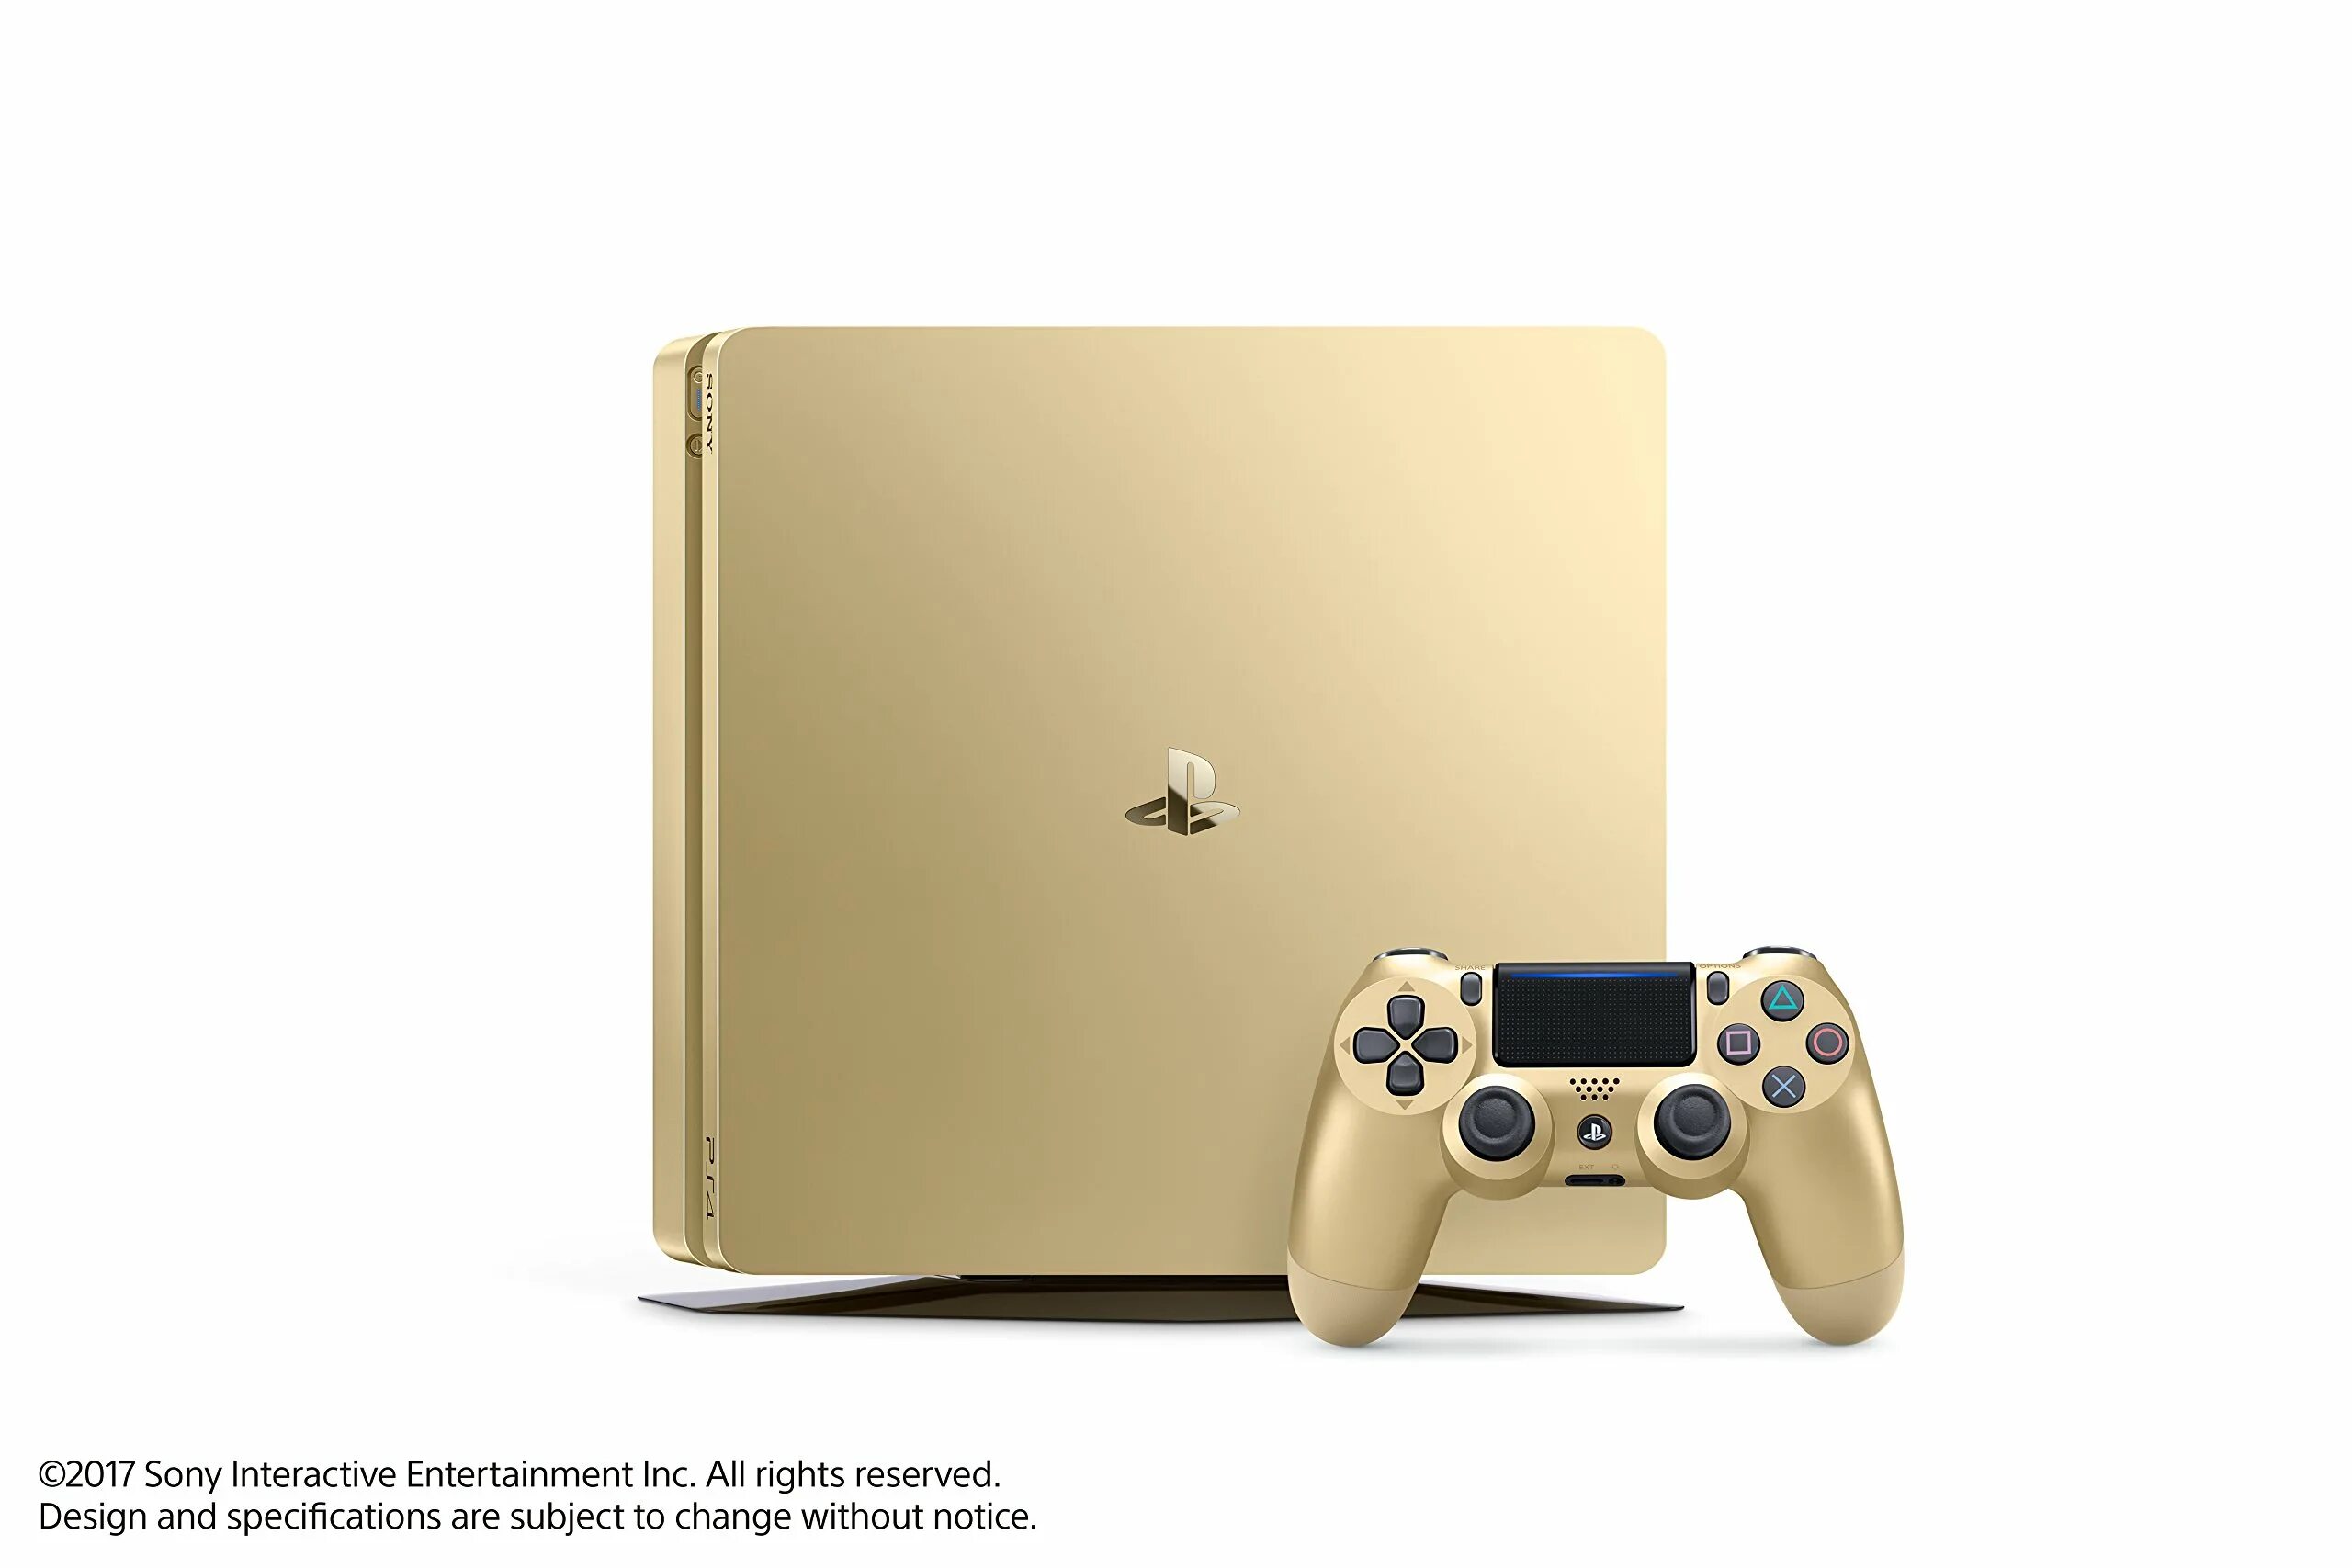 Ps4 Slim Gold Edition 1tb. PLAYSTATION 4 Slim Limited Edition. PLAYSTATION 4 Slim 1tb Limited Edition. Sony Gold ps4 Limited Edition.